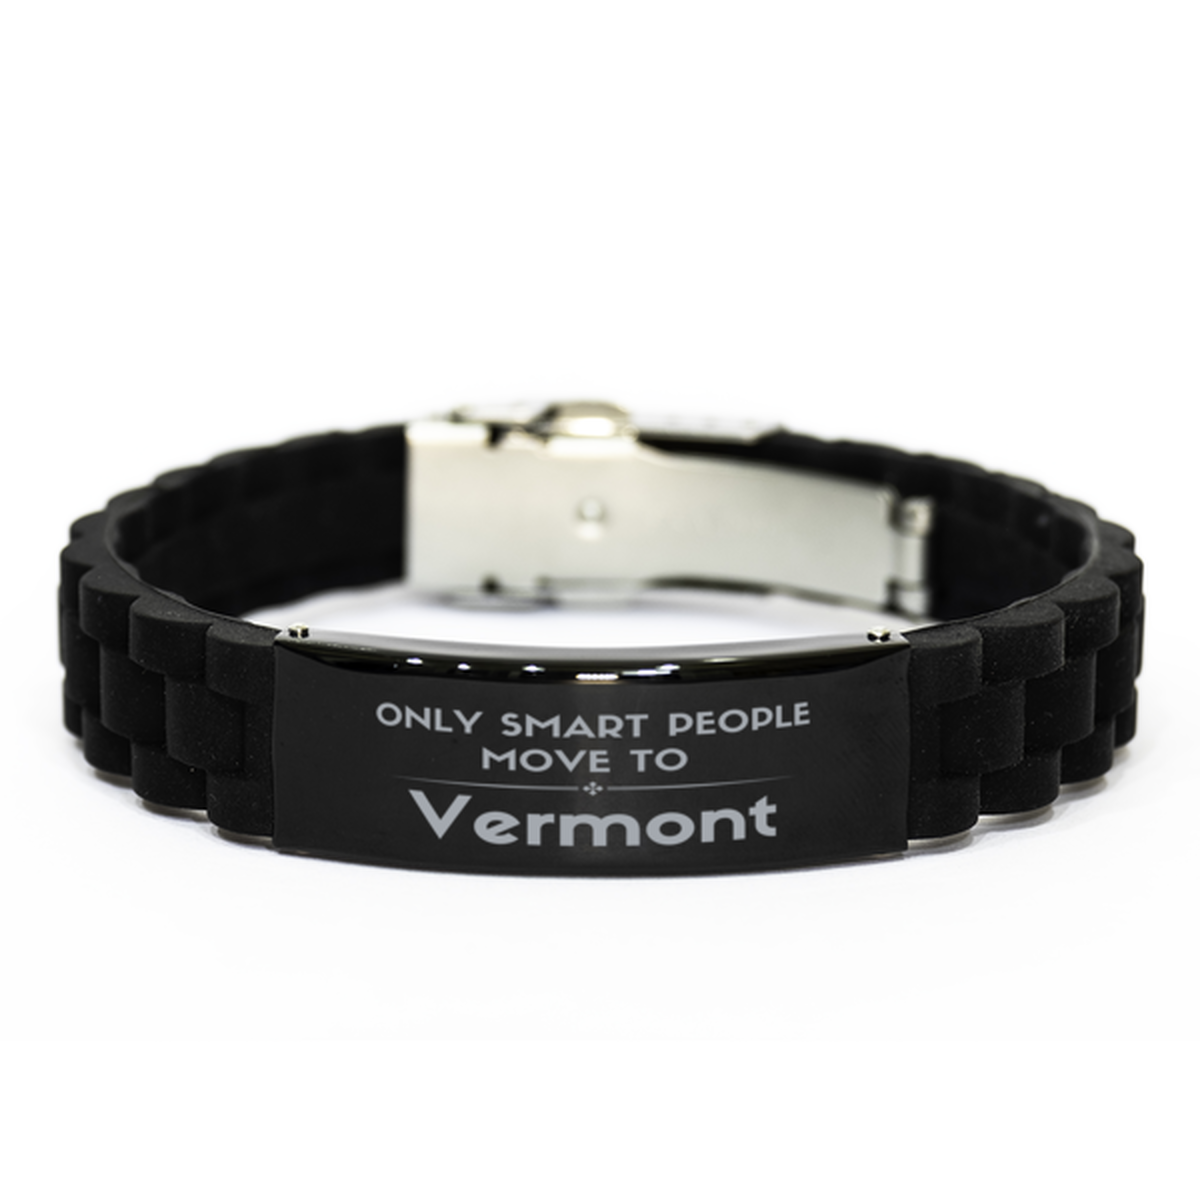 Only smart people move to Vermont Black Glidelock Clasp Bracelet, Gag Gifts For Vermont, Move to Vermont Gifts for Friends Coworker Funny Saying Quote